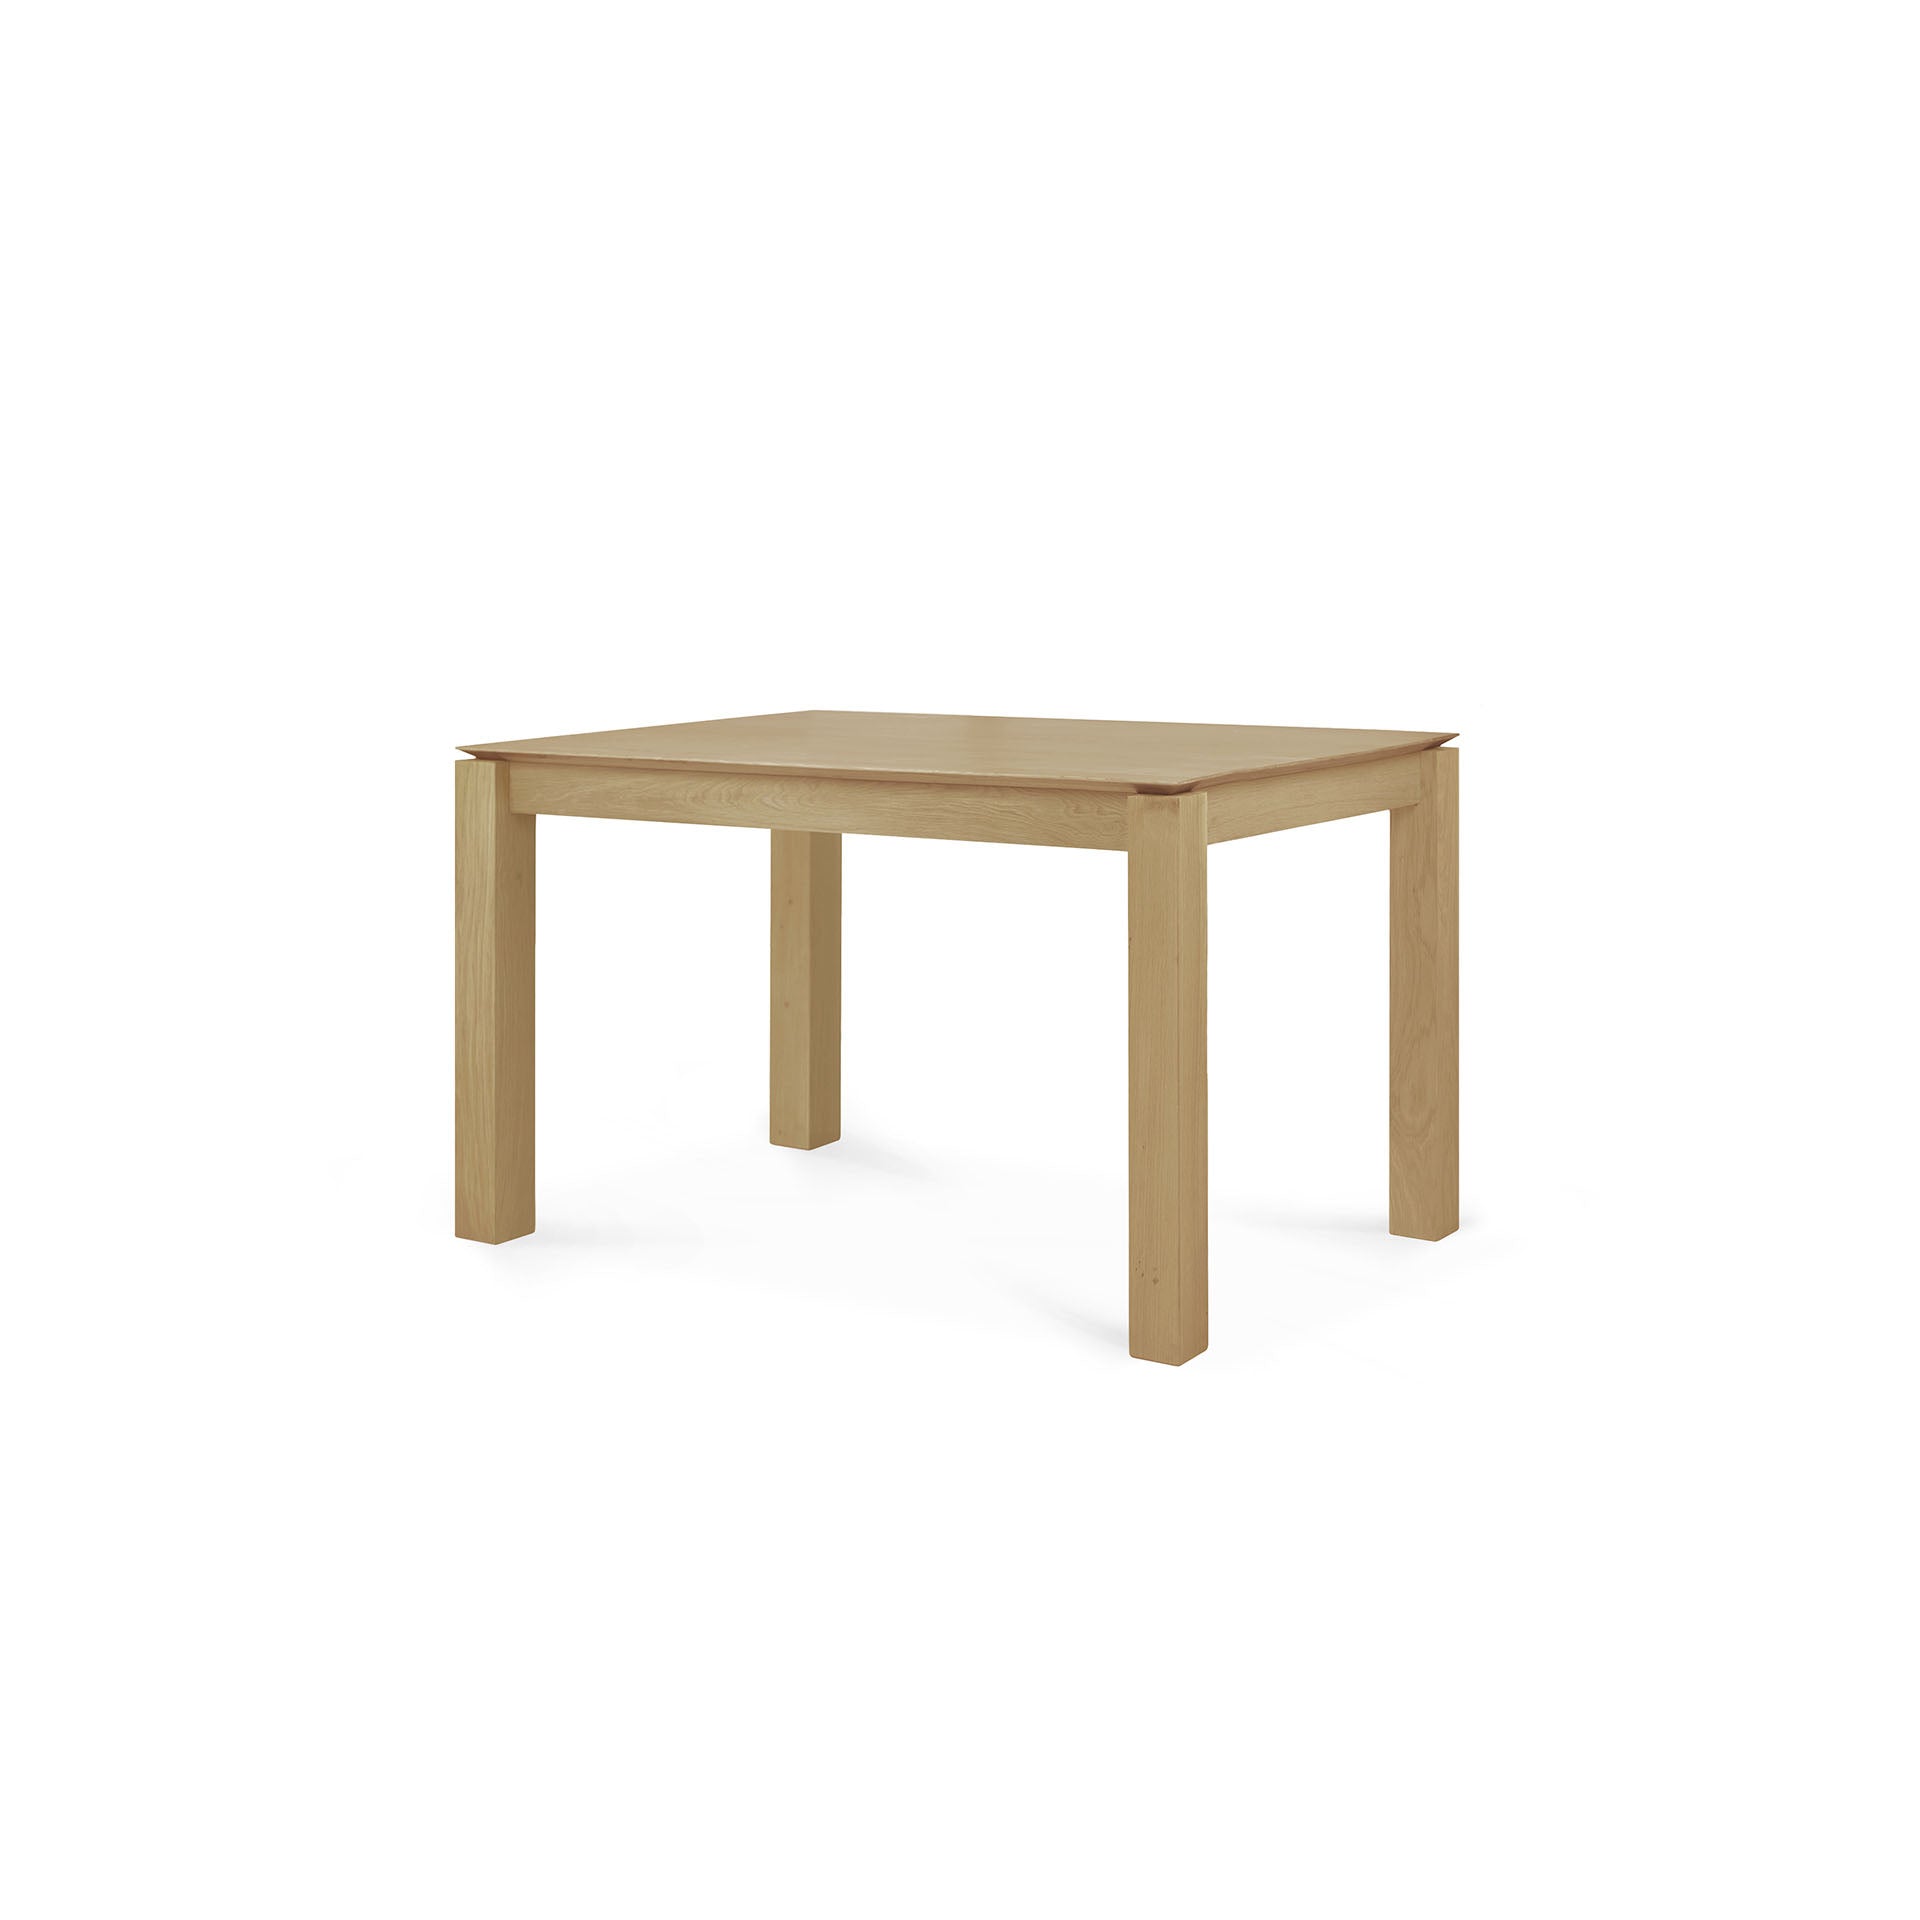 Ethnicraft Slice Oak Extendable Dining Table